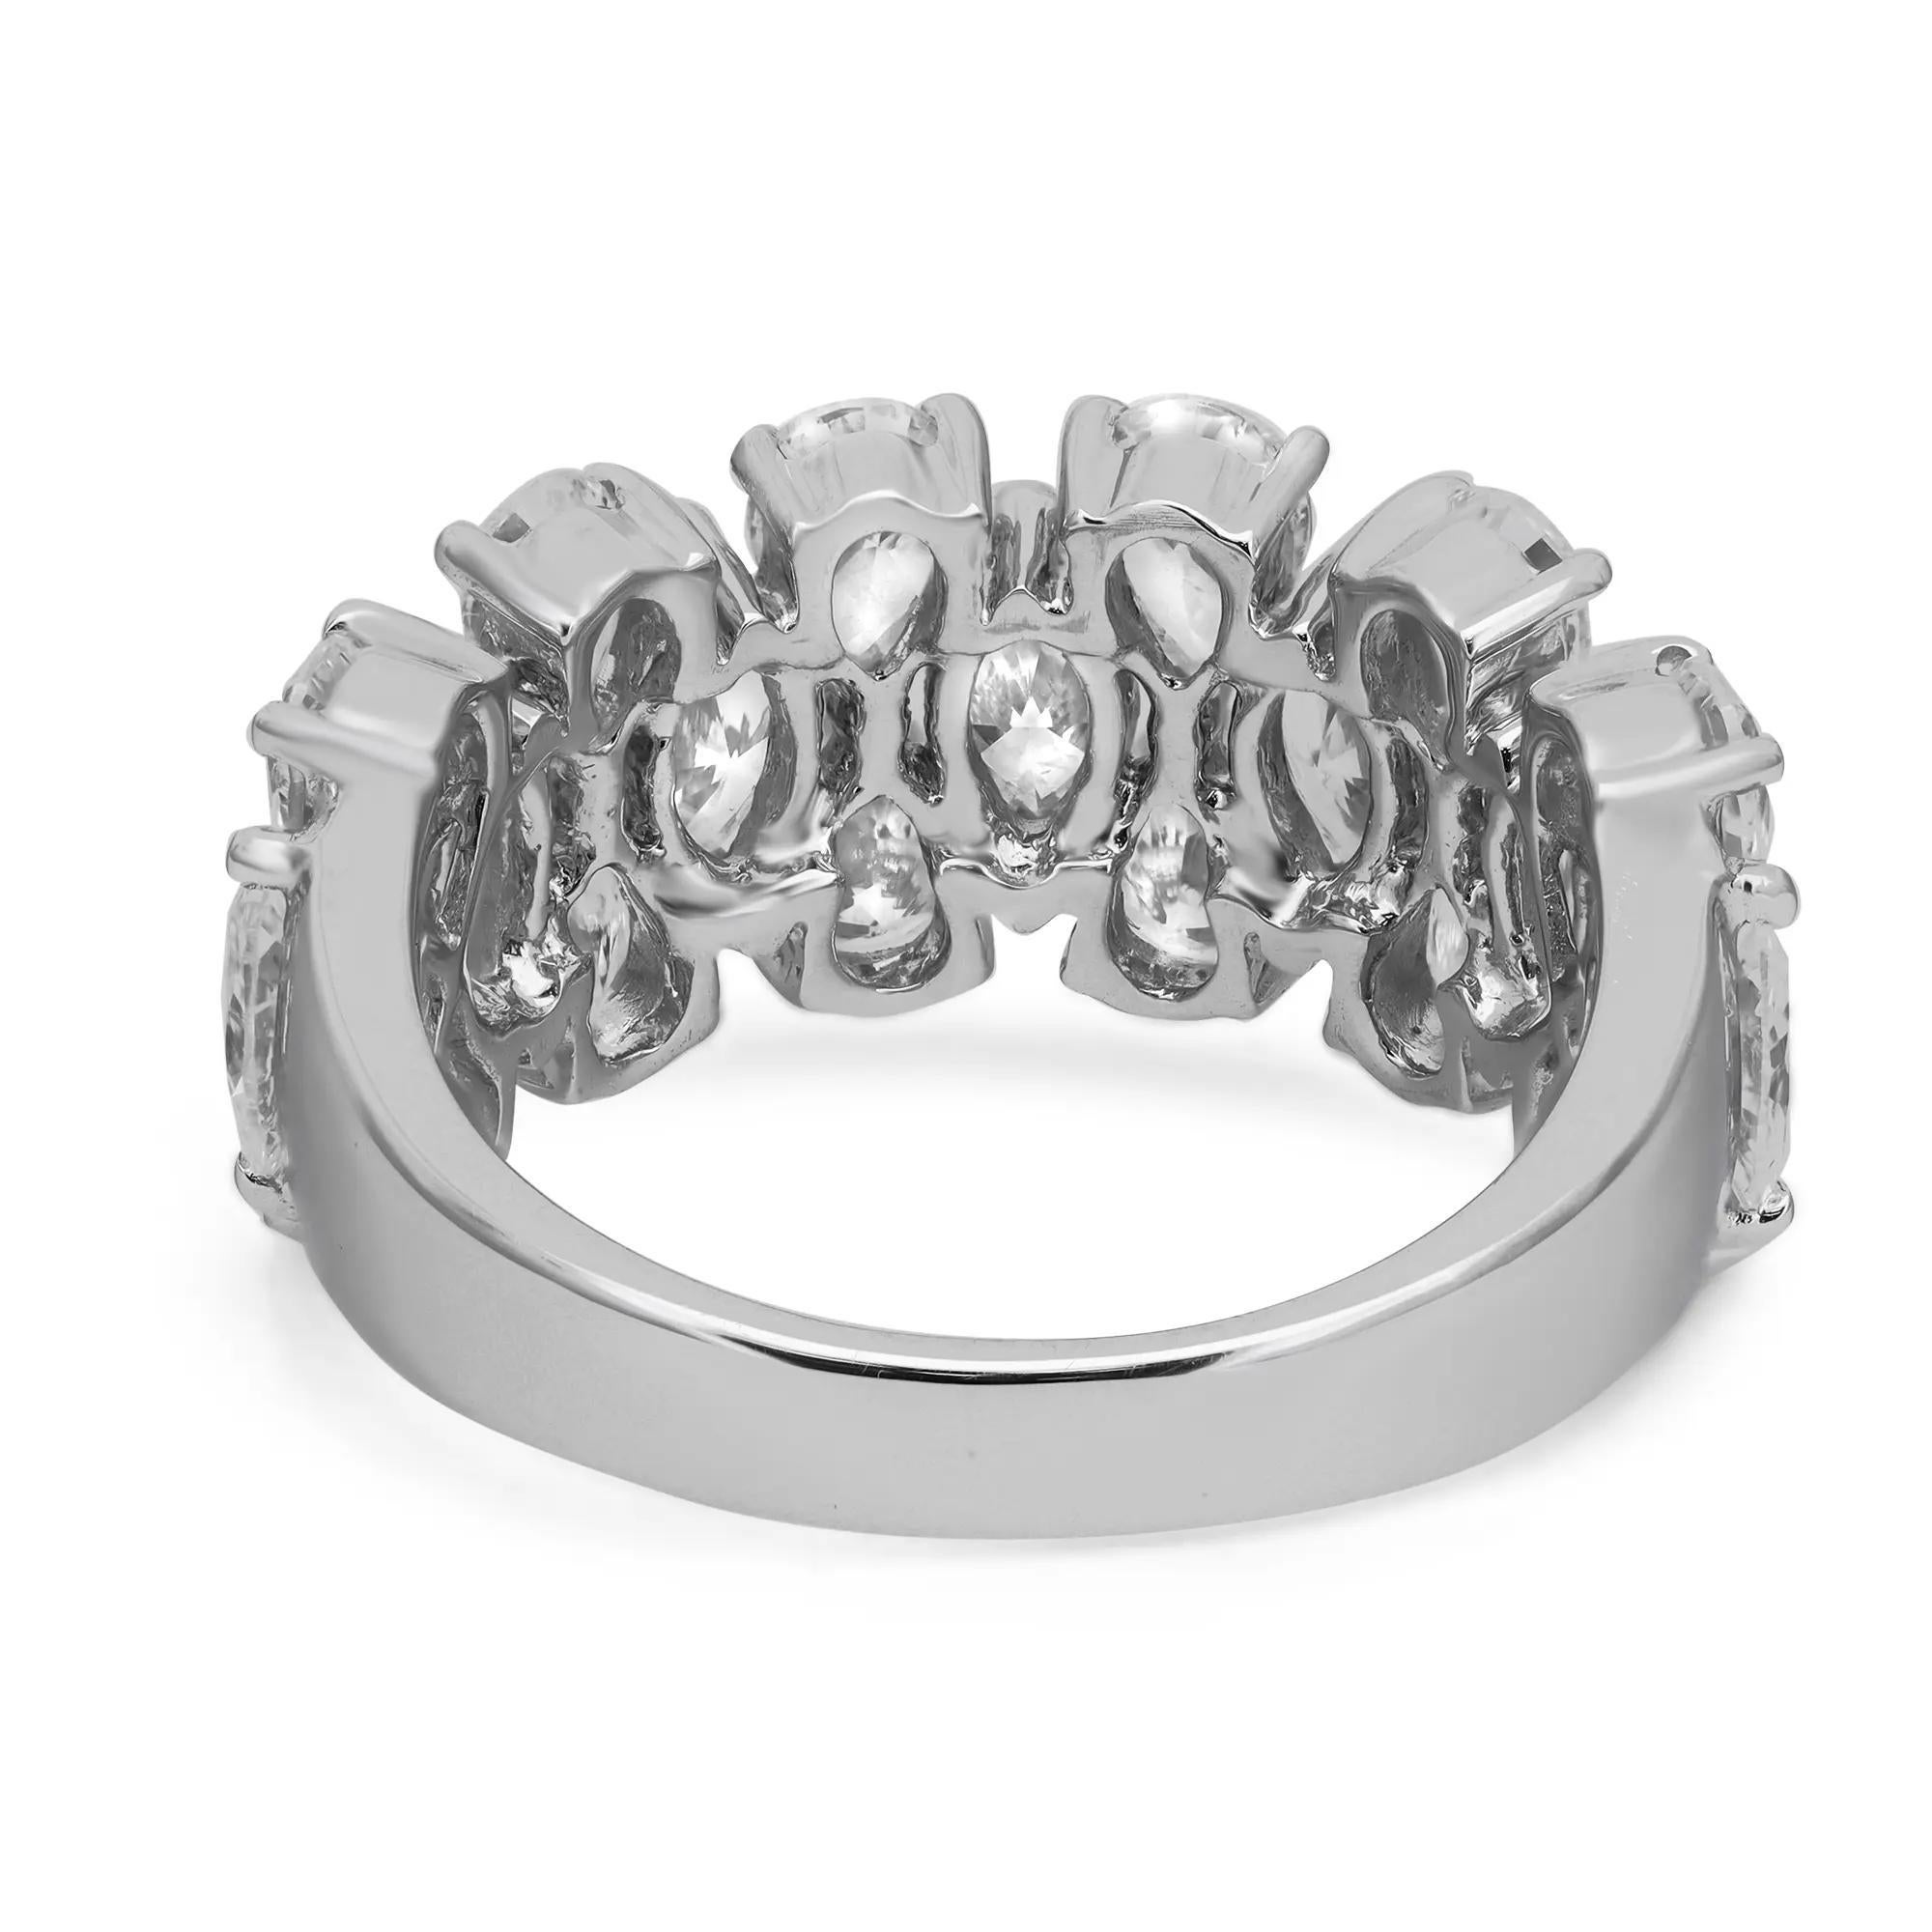 For Sale:  3.93 Carat  Marquise & Pear Shape Diamond Fashion Ring 18K White Gold  3